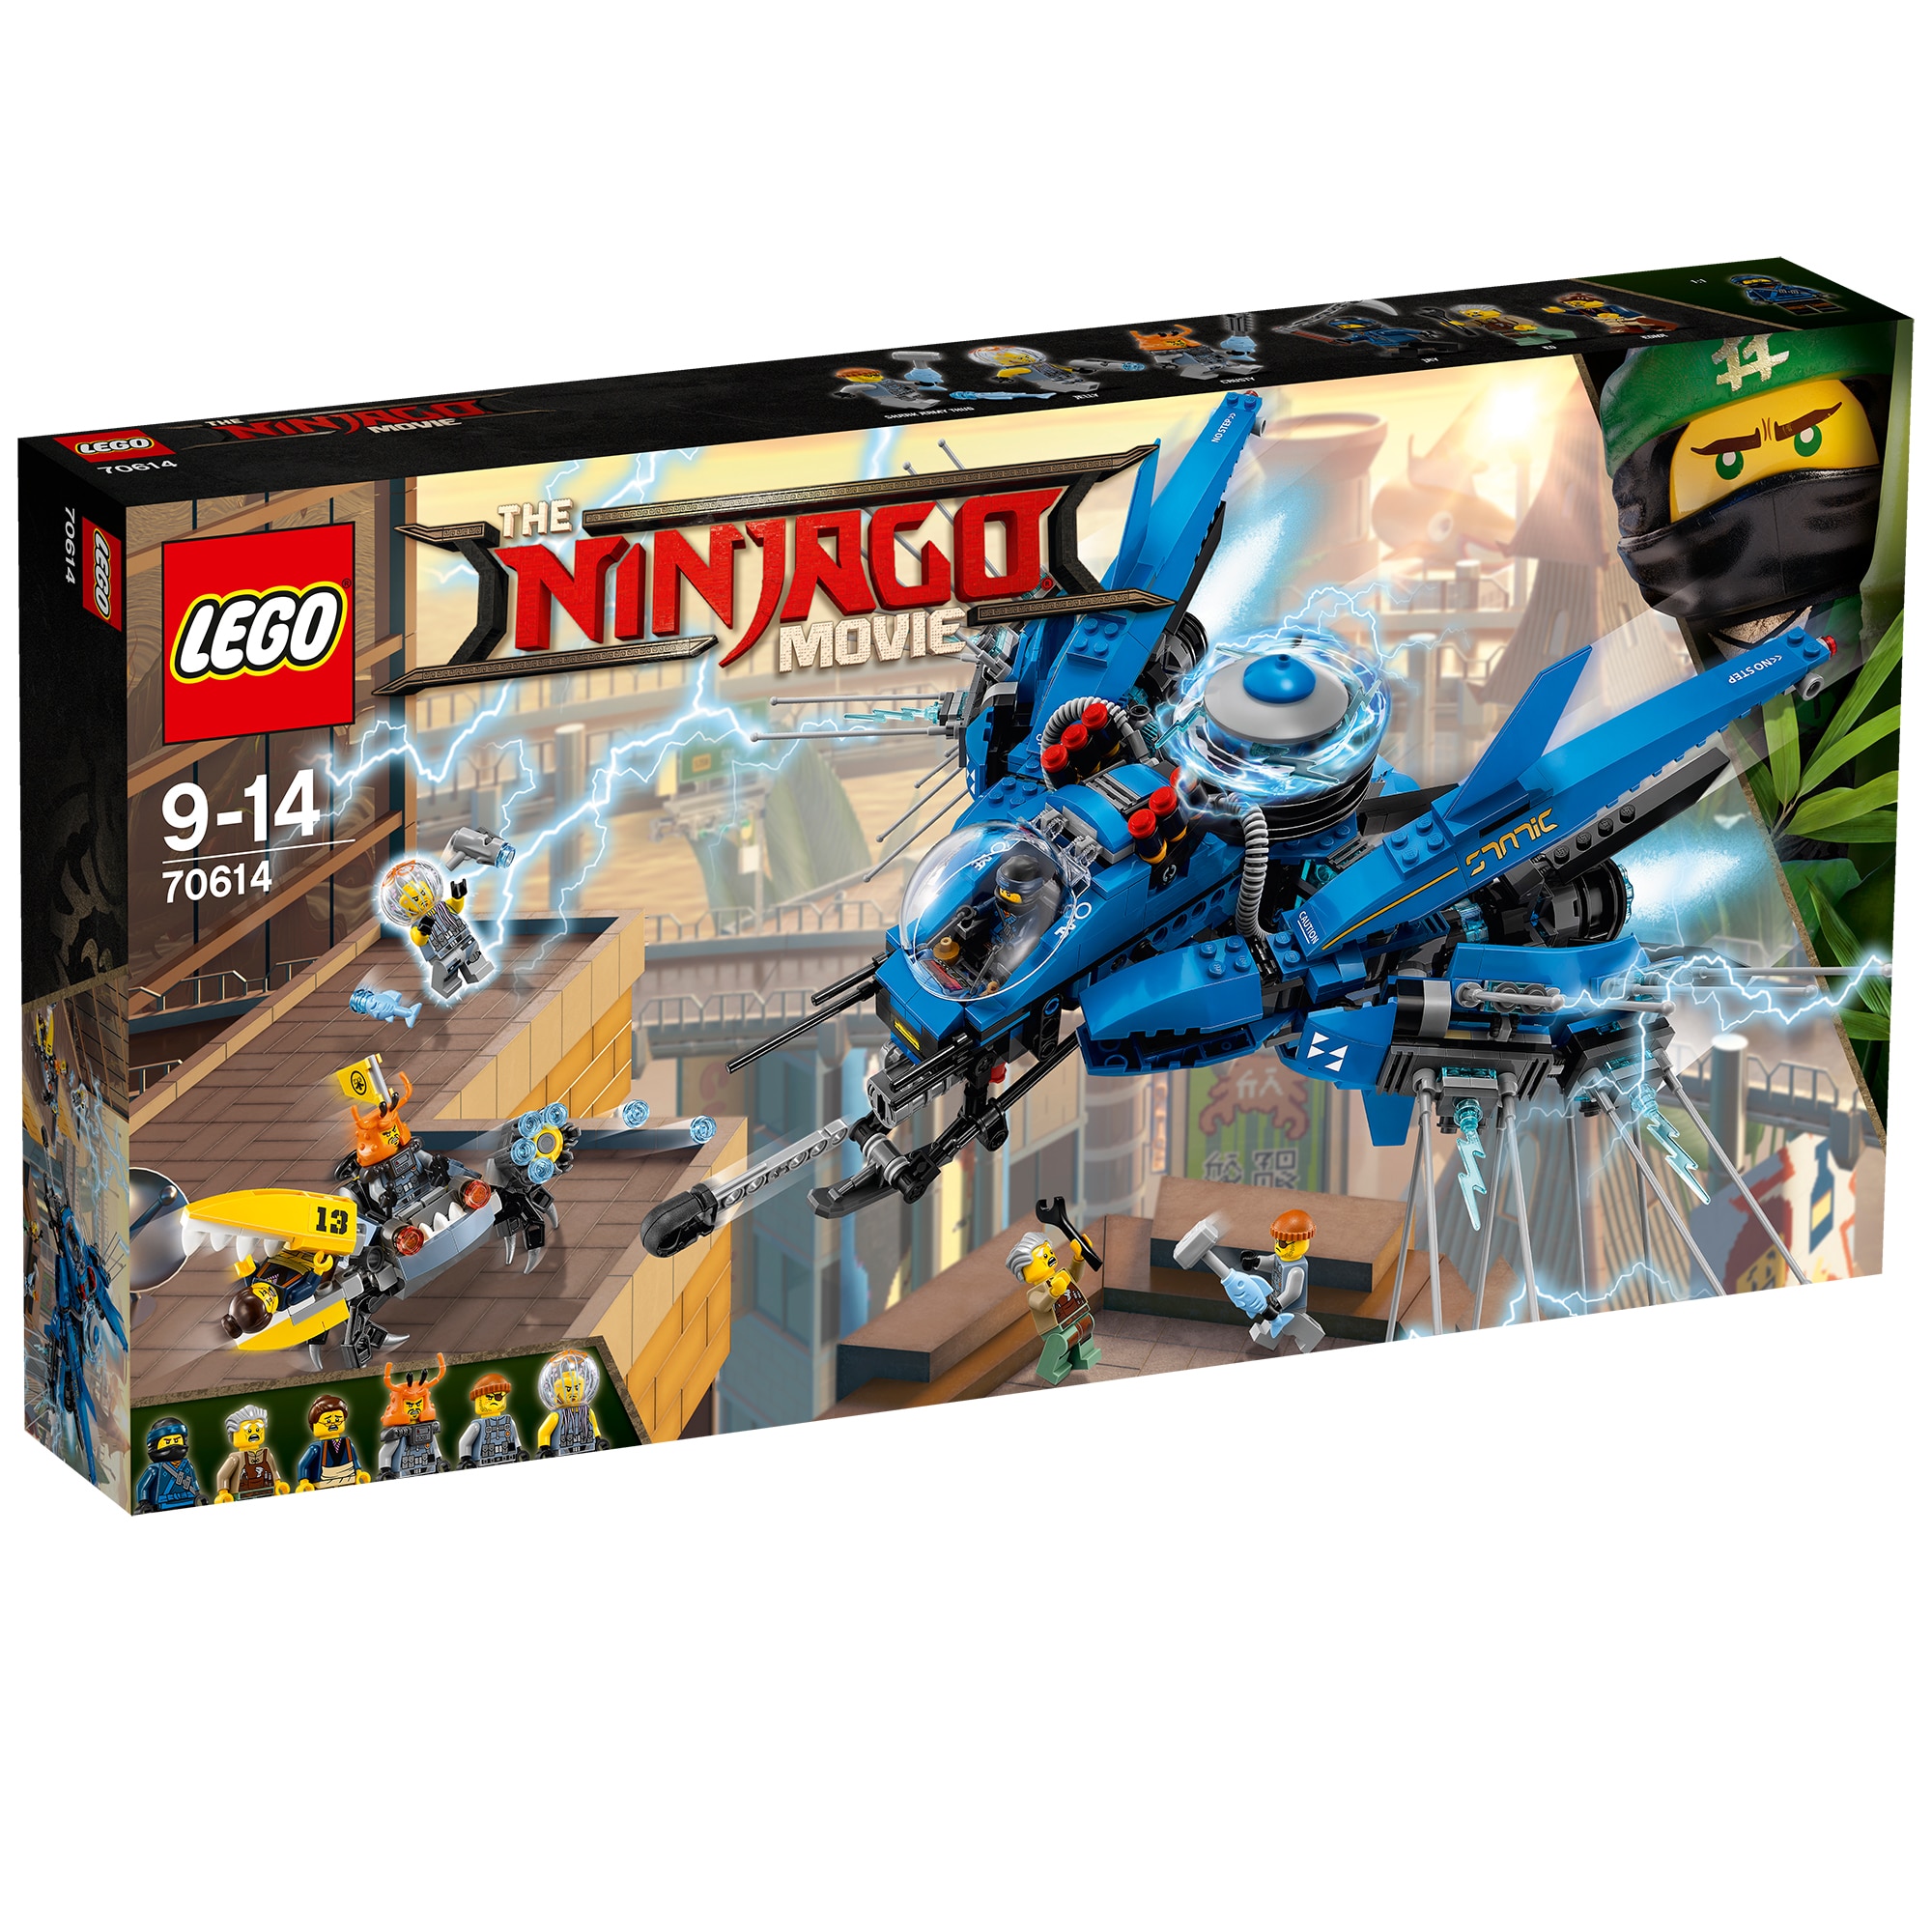 Green background is there second hand LEGO® NINJAGO™ Avion cu reactie 70614 - eMAG.ro